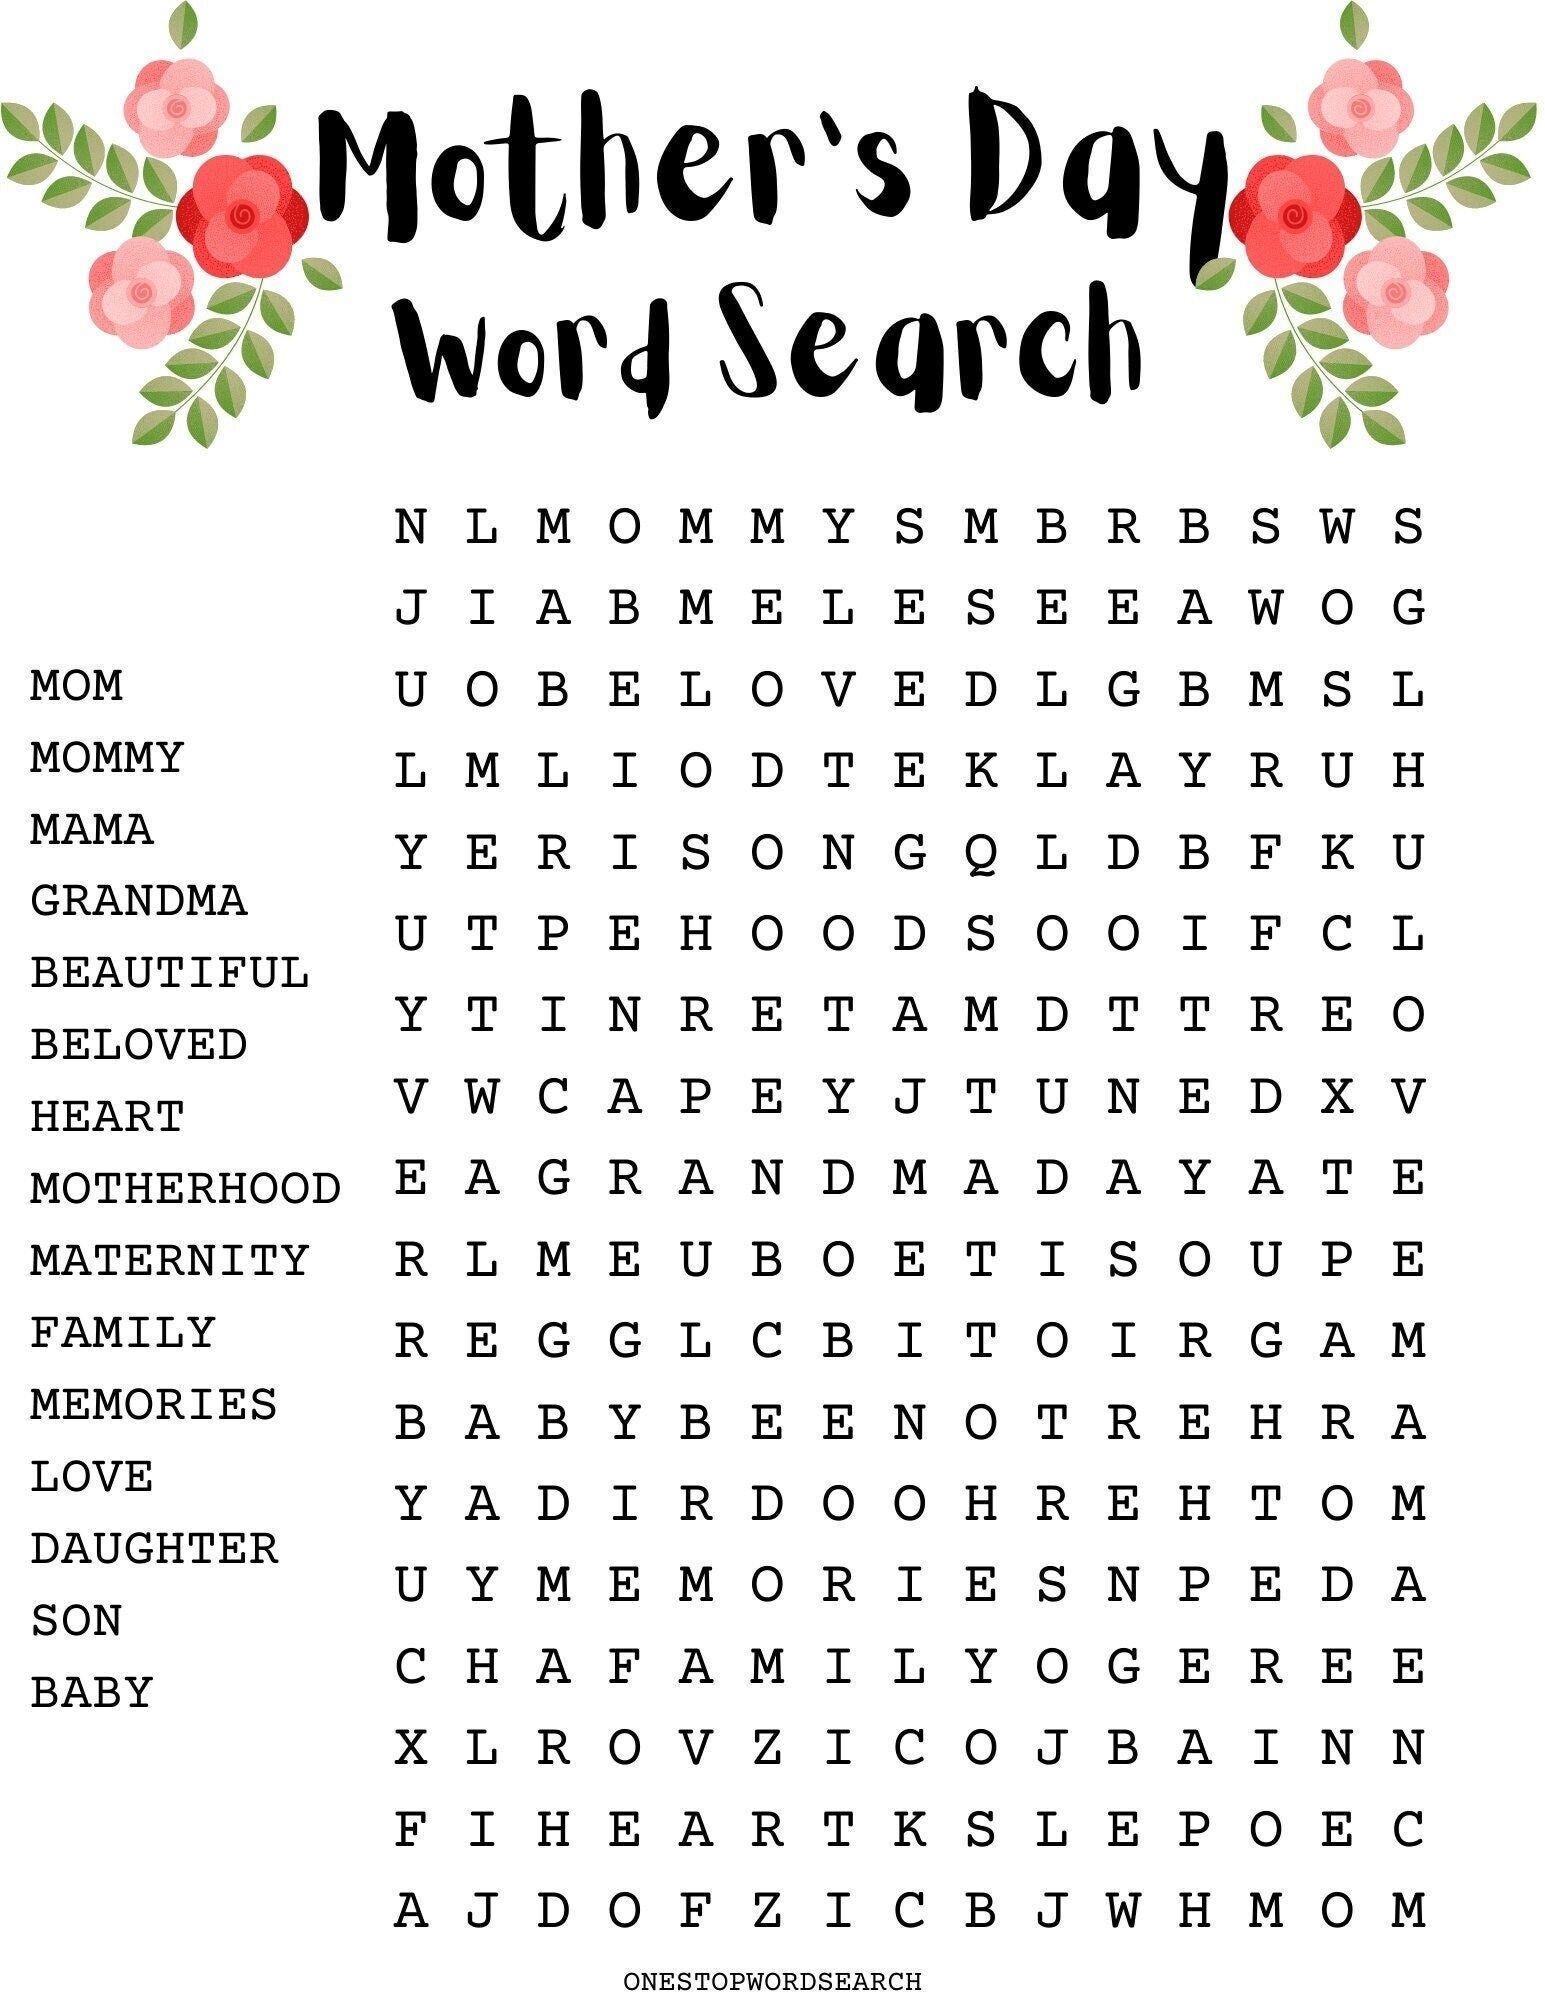 Mother s Day Word Search Puzzle With Answer Sheet Holiday Games Holiday Puzzles Family Activities Children s Puzzles Etsy UK Business For Kids Kids Family Activities Puzzles For Kids